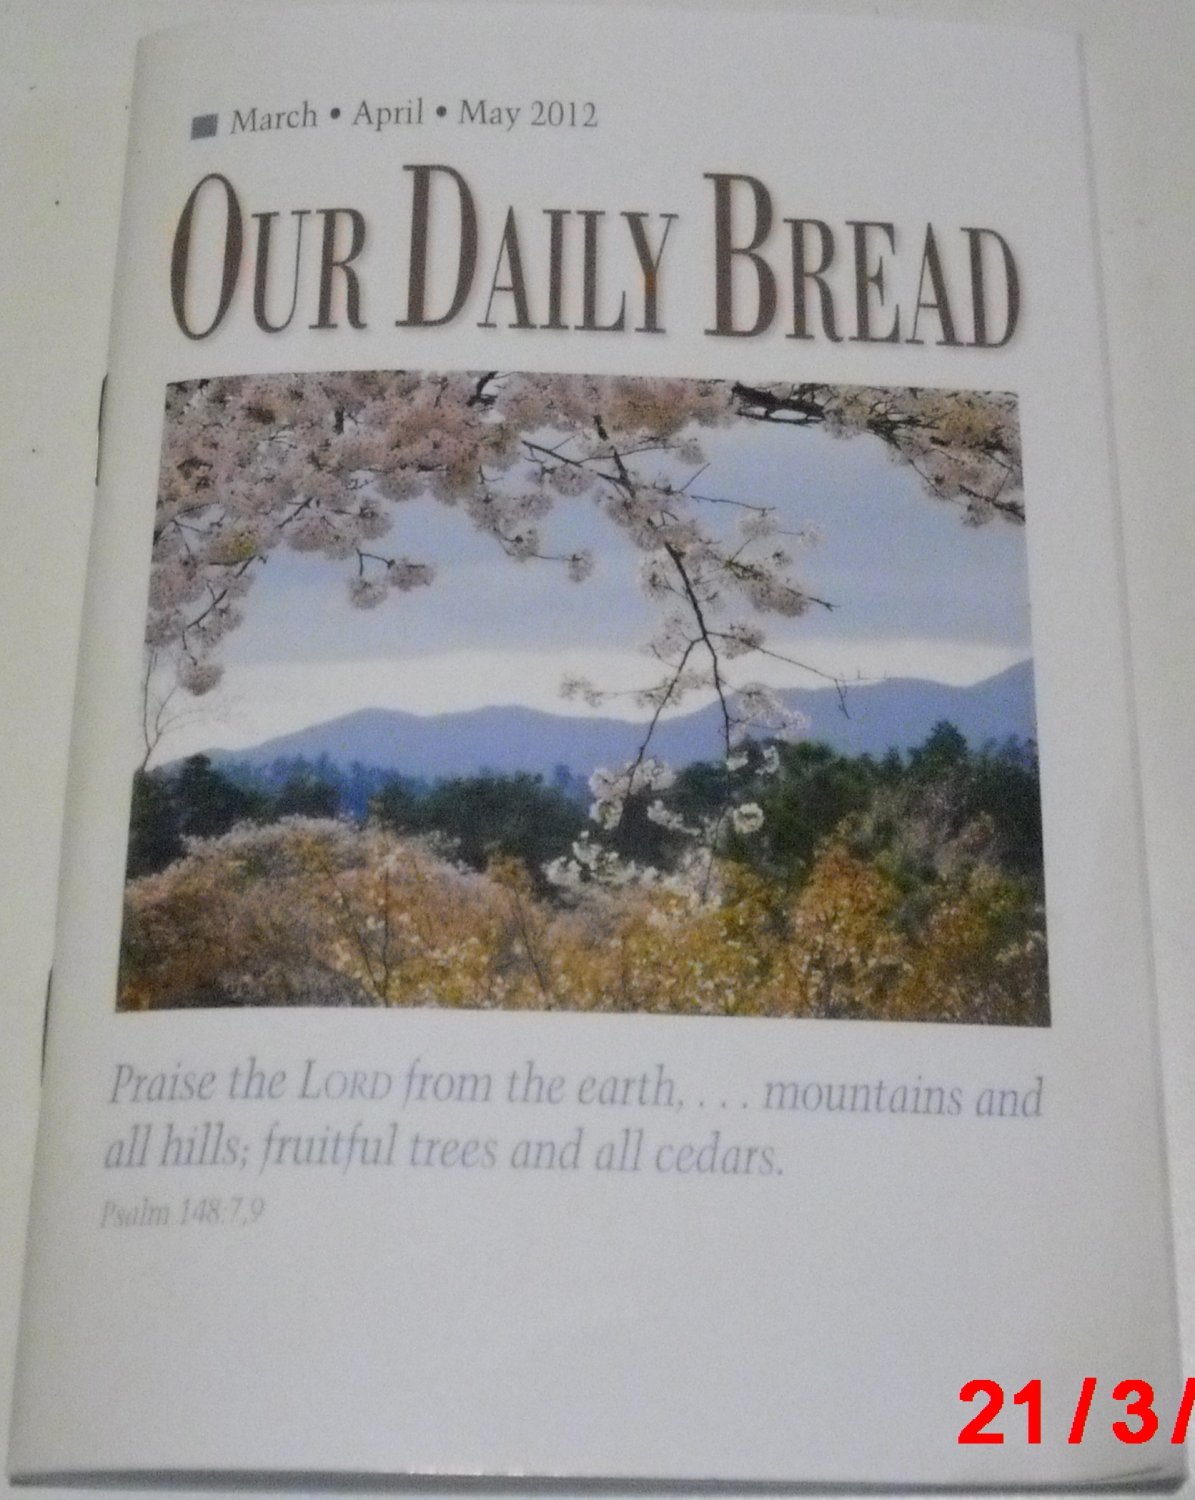 Our Daily Bread March, April, May 2012